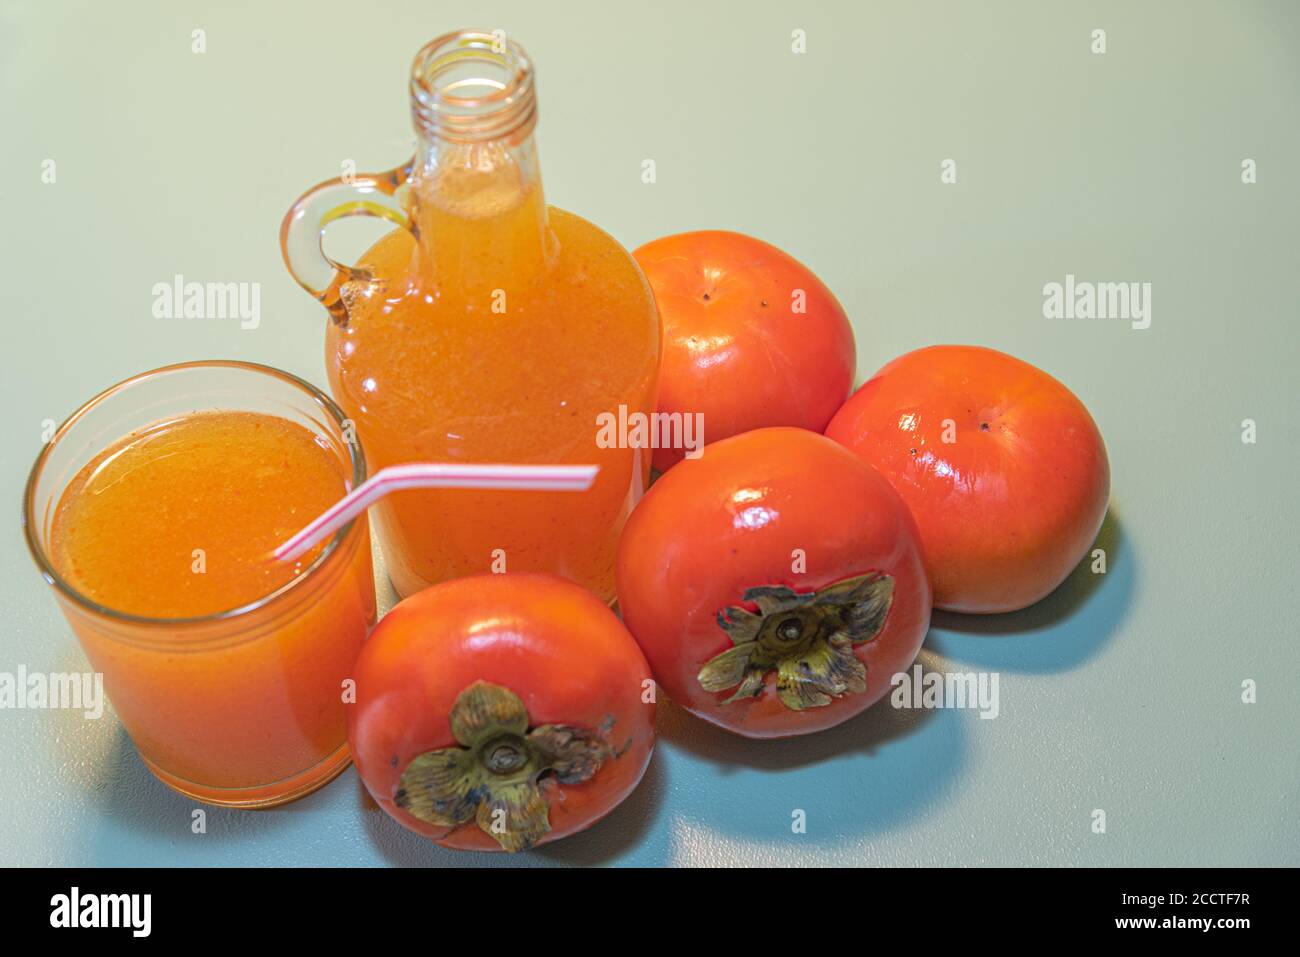 Persimmon fruits and juice. Fiber source. Fruit that favors weight loss. Diospyrus kaki L. The persimmon tree is a tree of Asian origin, worldwide app Stock Photo